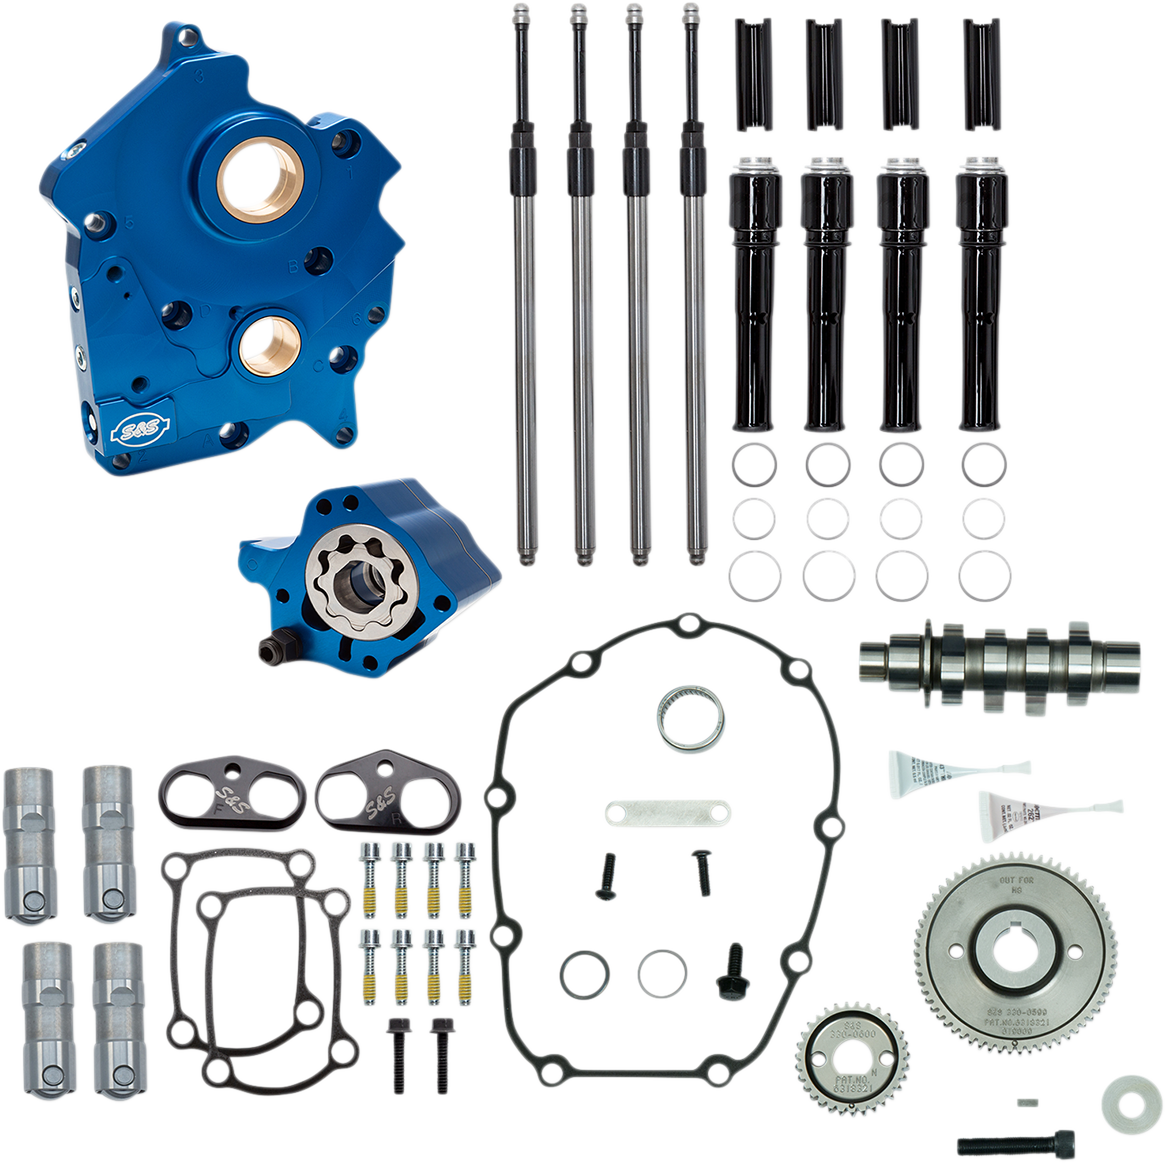 S&S CYCLE Cam Chest Kit with Plate M8 - Gear Drive - Oil Cooled - 465 Cam - Black Pushrods 310-1013A